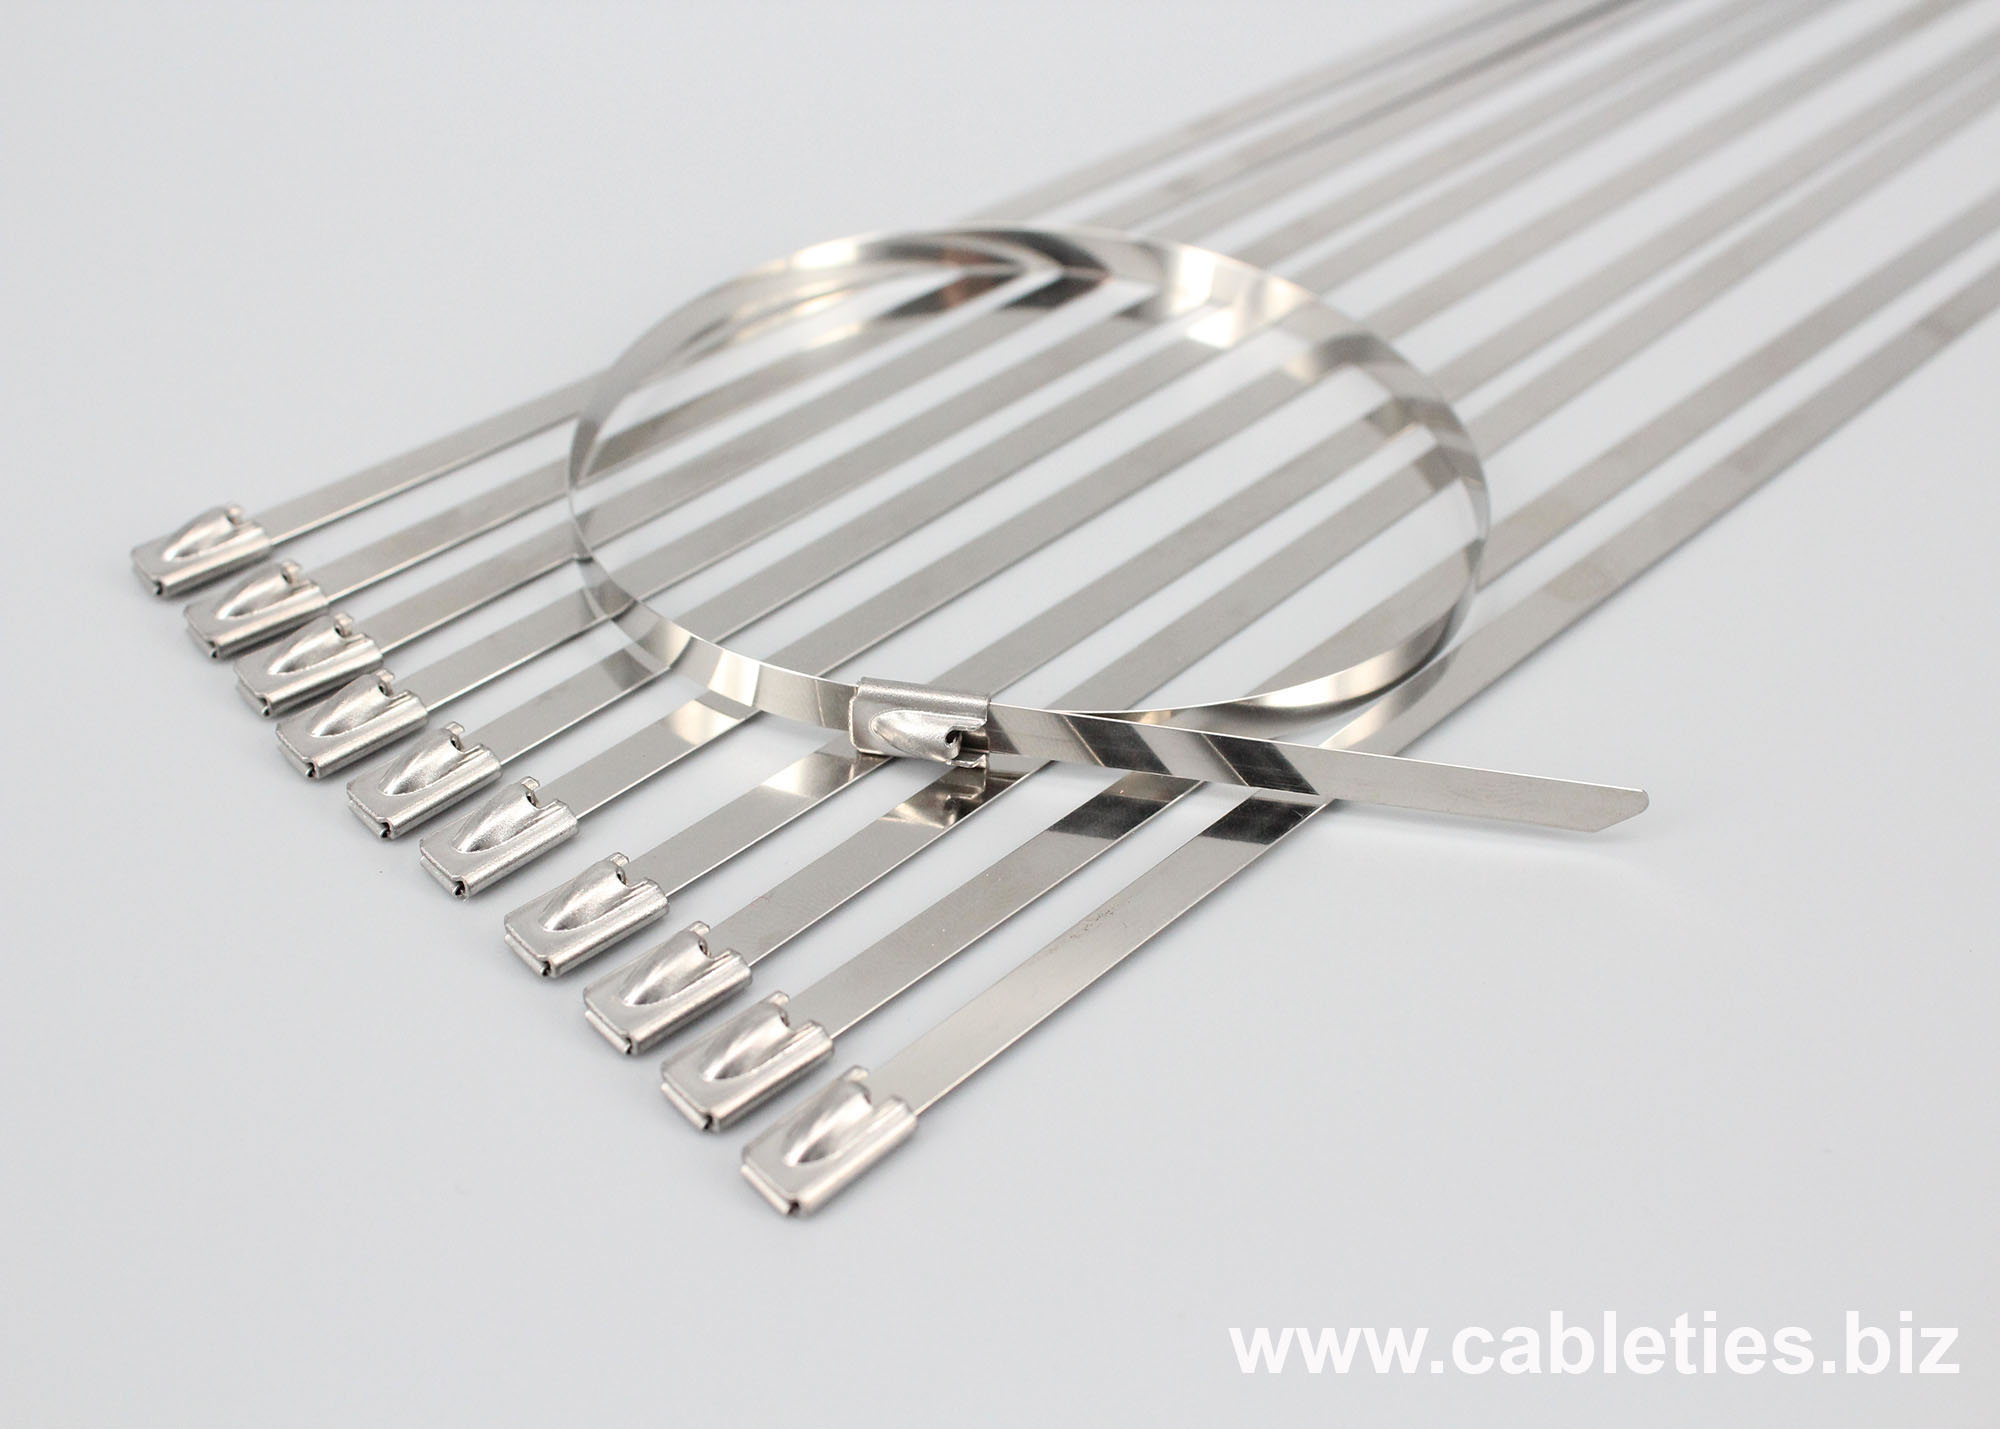 Ball locking Stainless steel cable ties